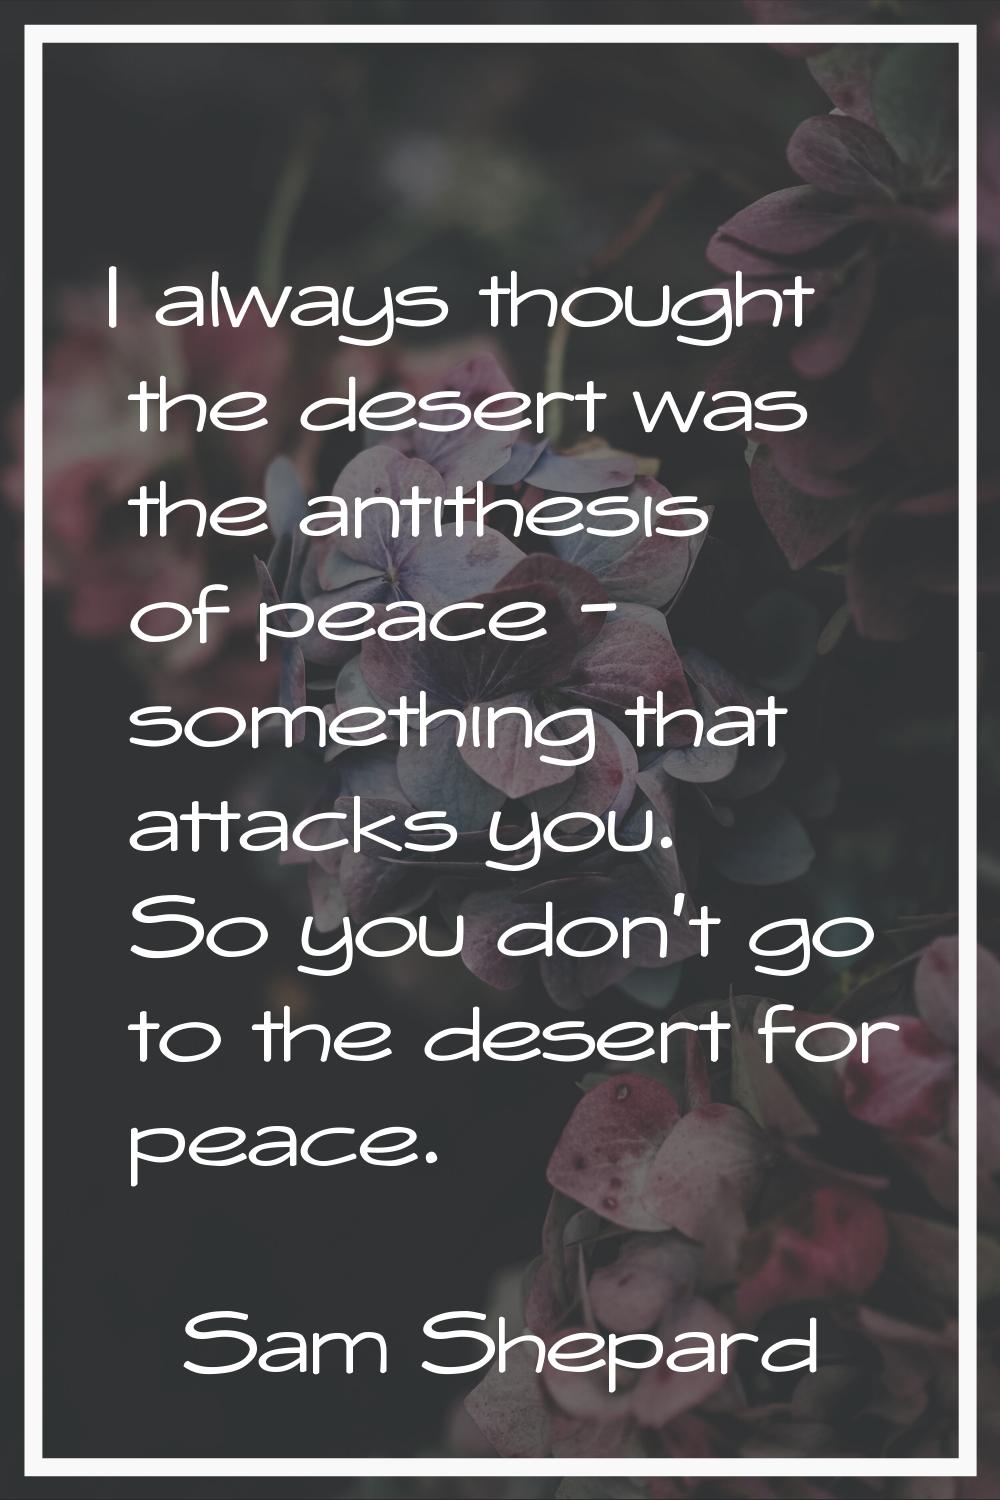 I always thought the desert was the antithesis of peace - something that attacks you. So you don't 